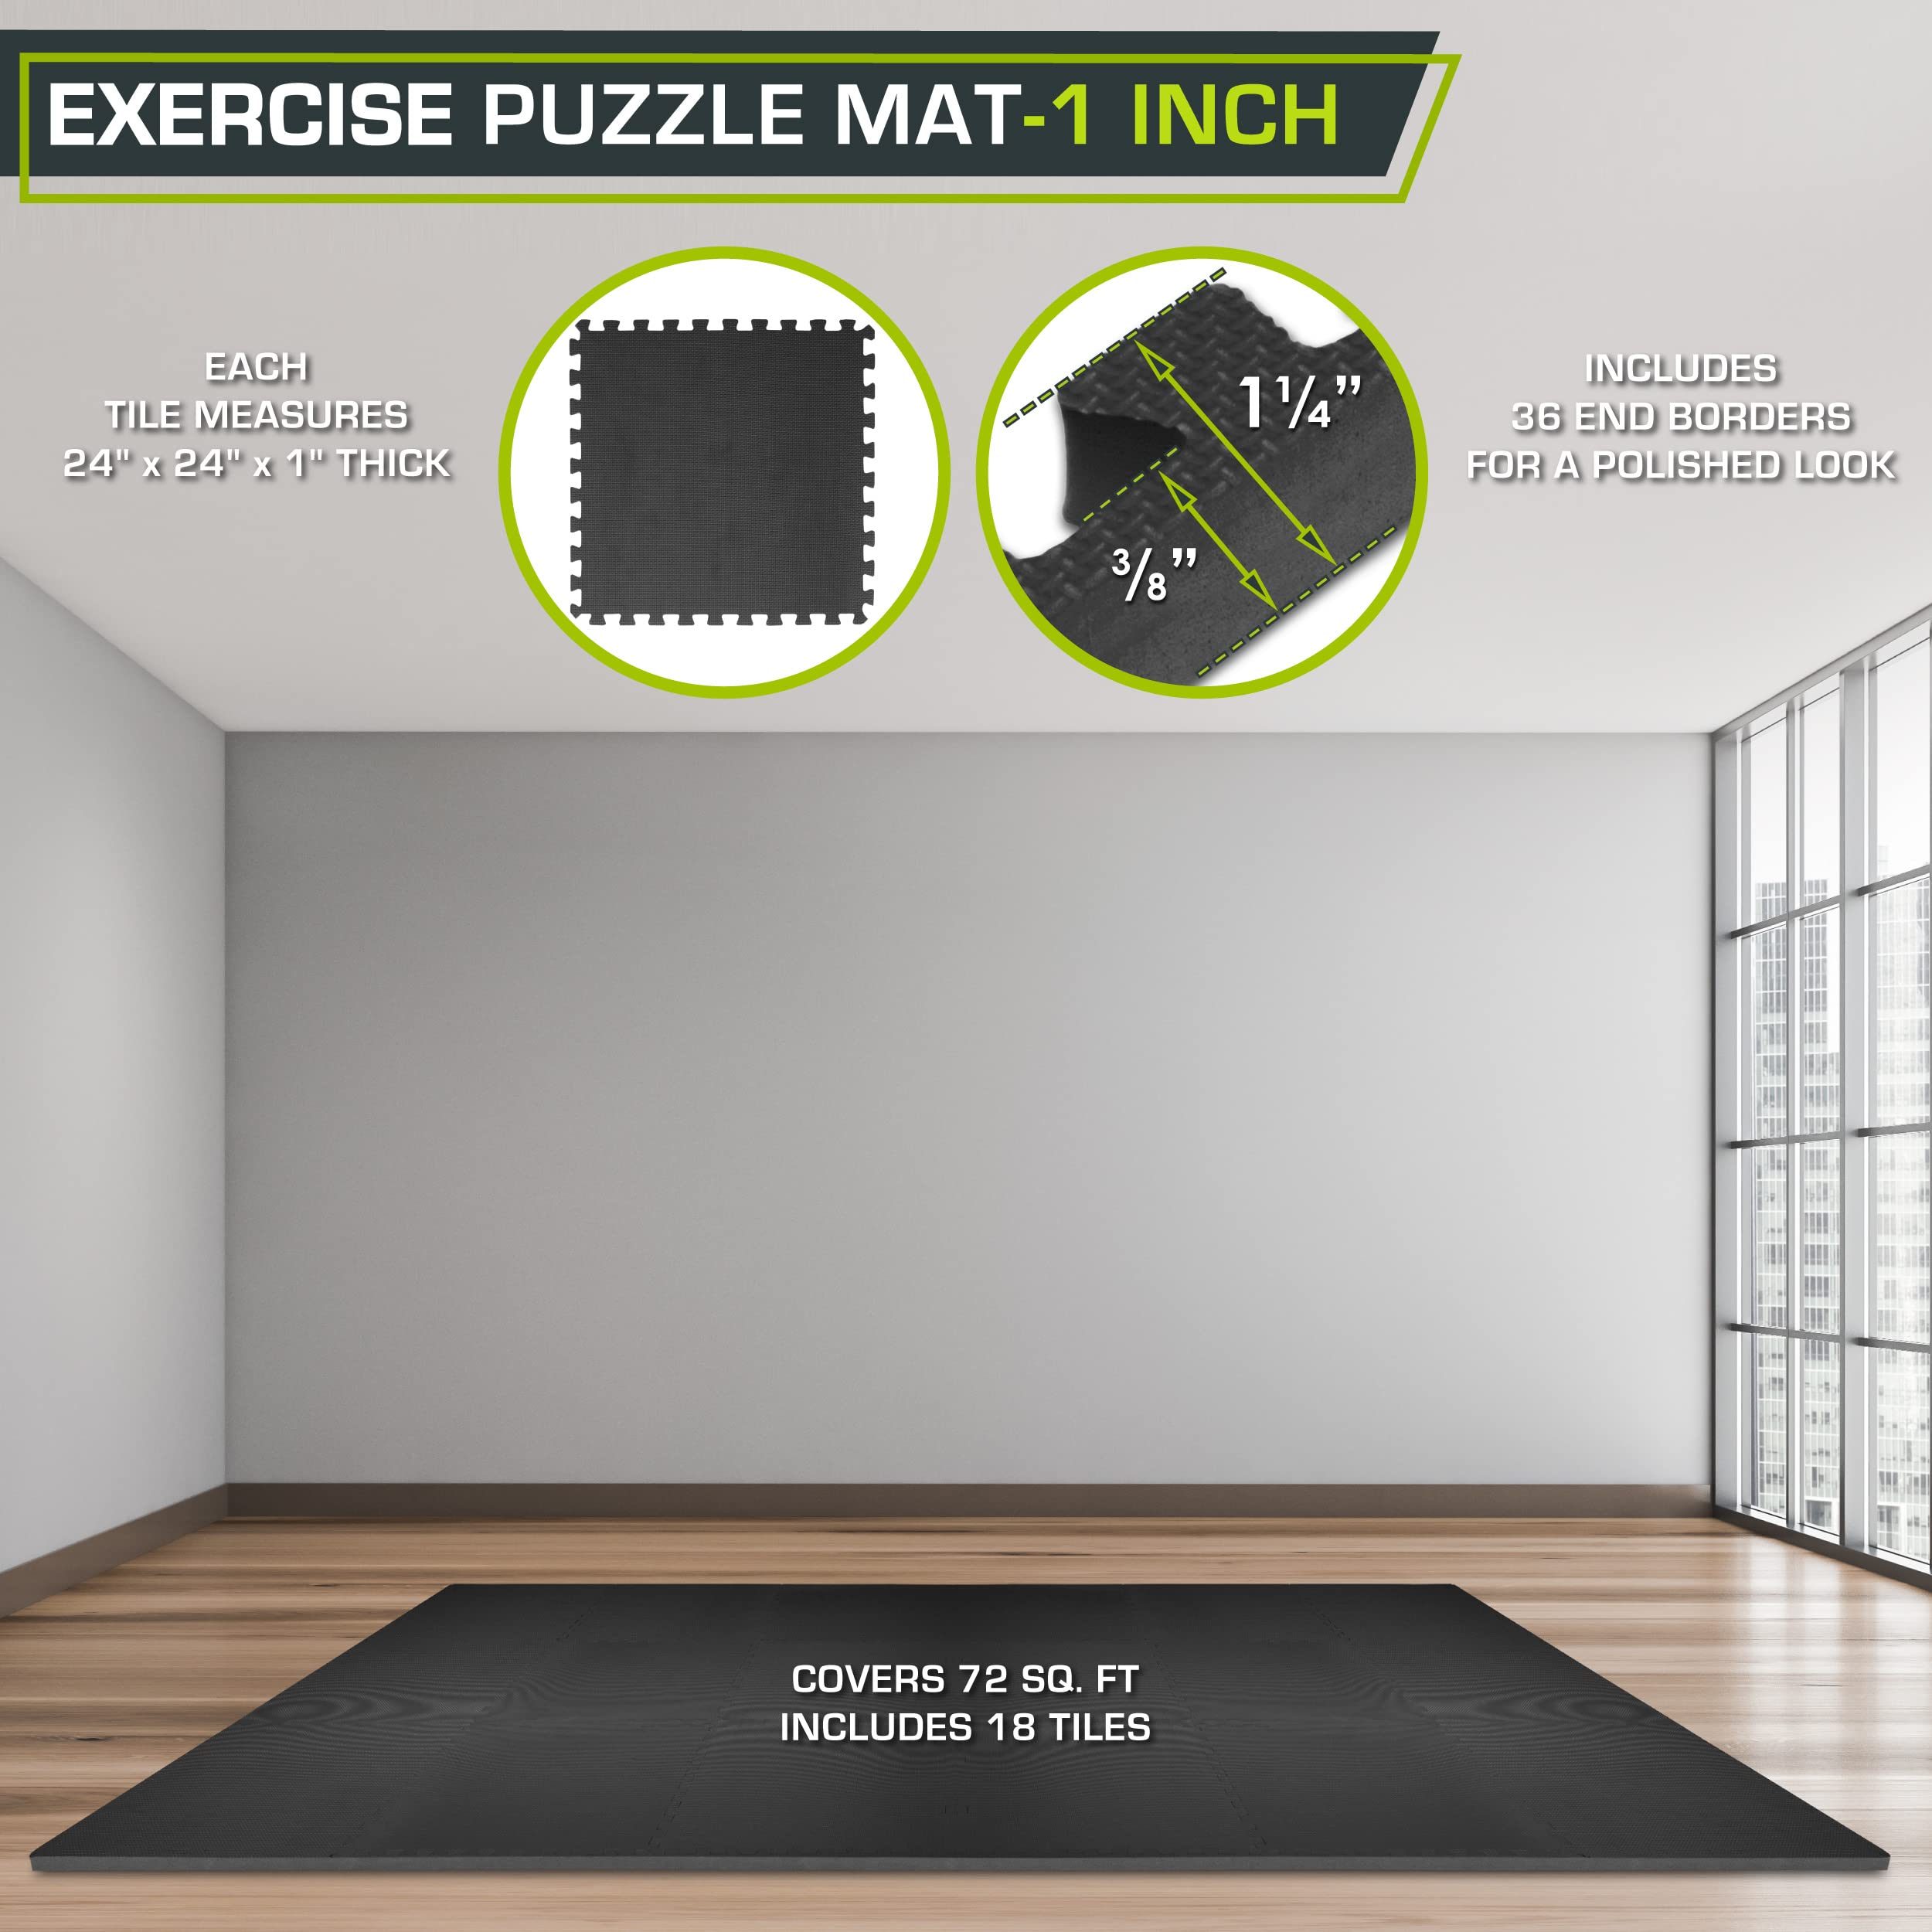 ProsourceFit Extra Thick Puzzle Exercise Mat 1”, EVA Foam Interlocking Tiles for Protective, Cushioned Workout Flooring for Home and Gym Equipment